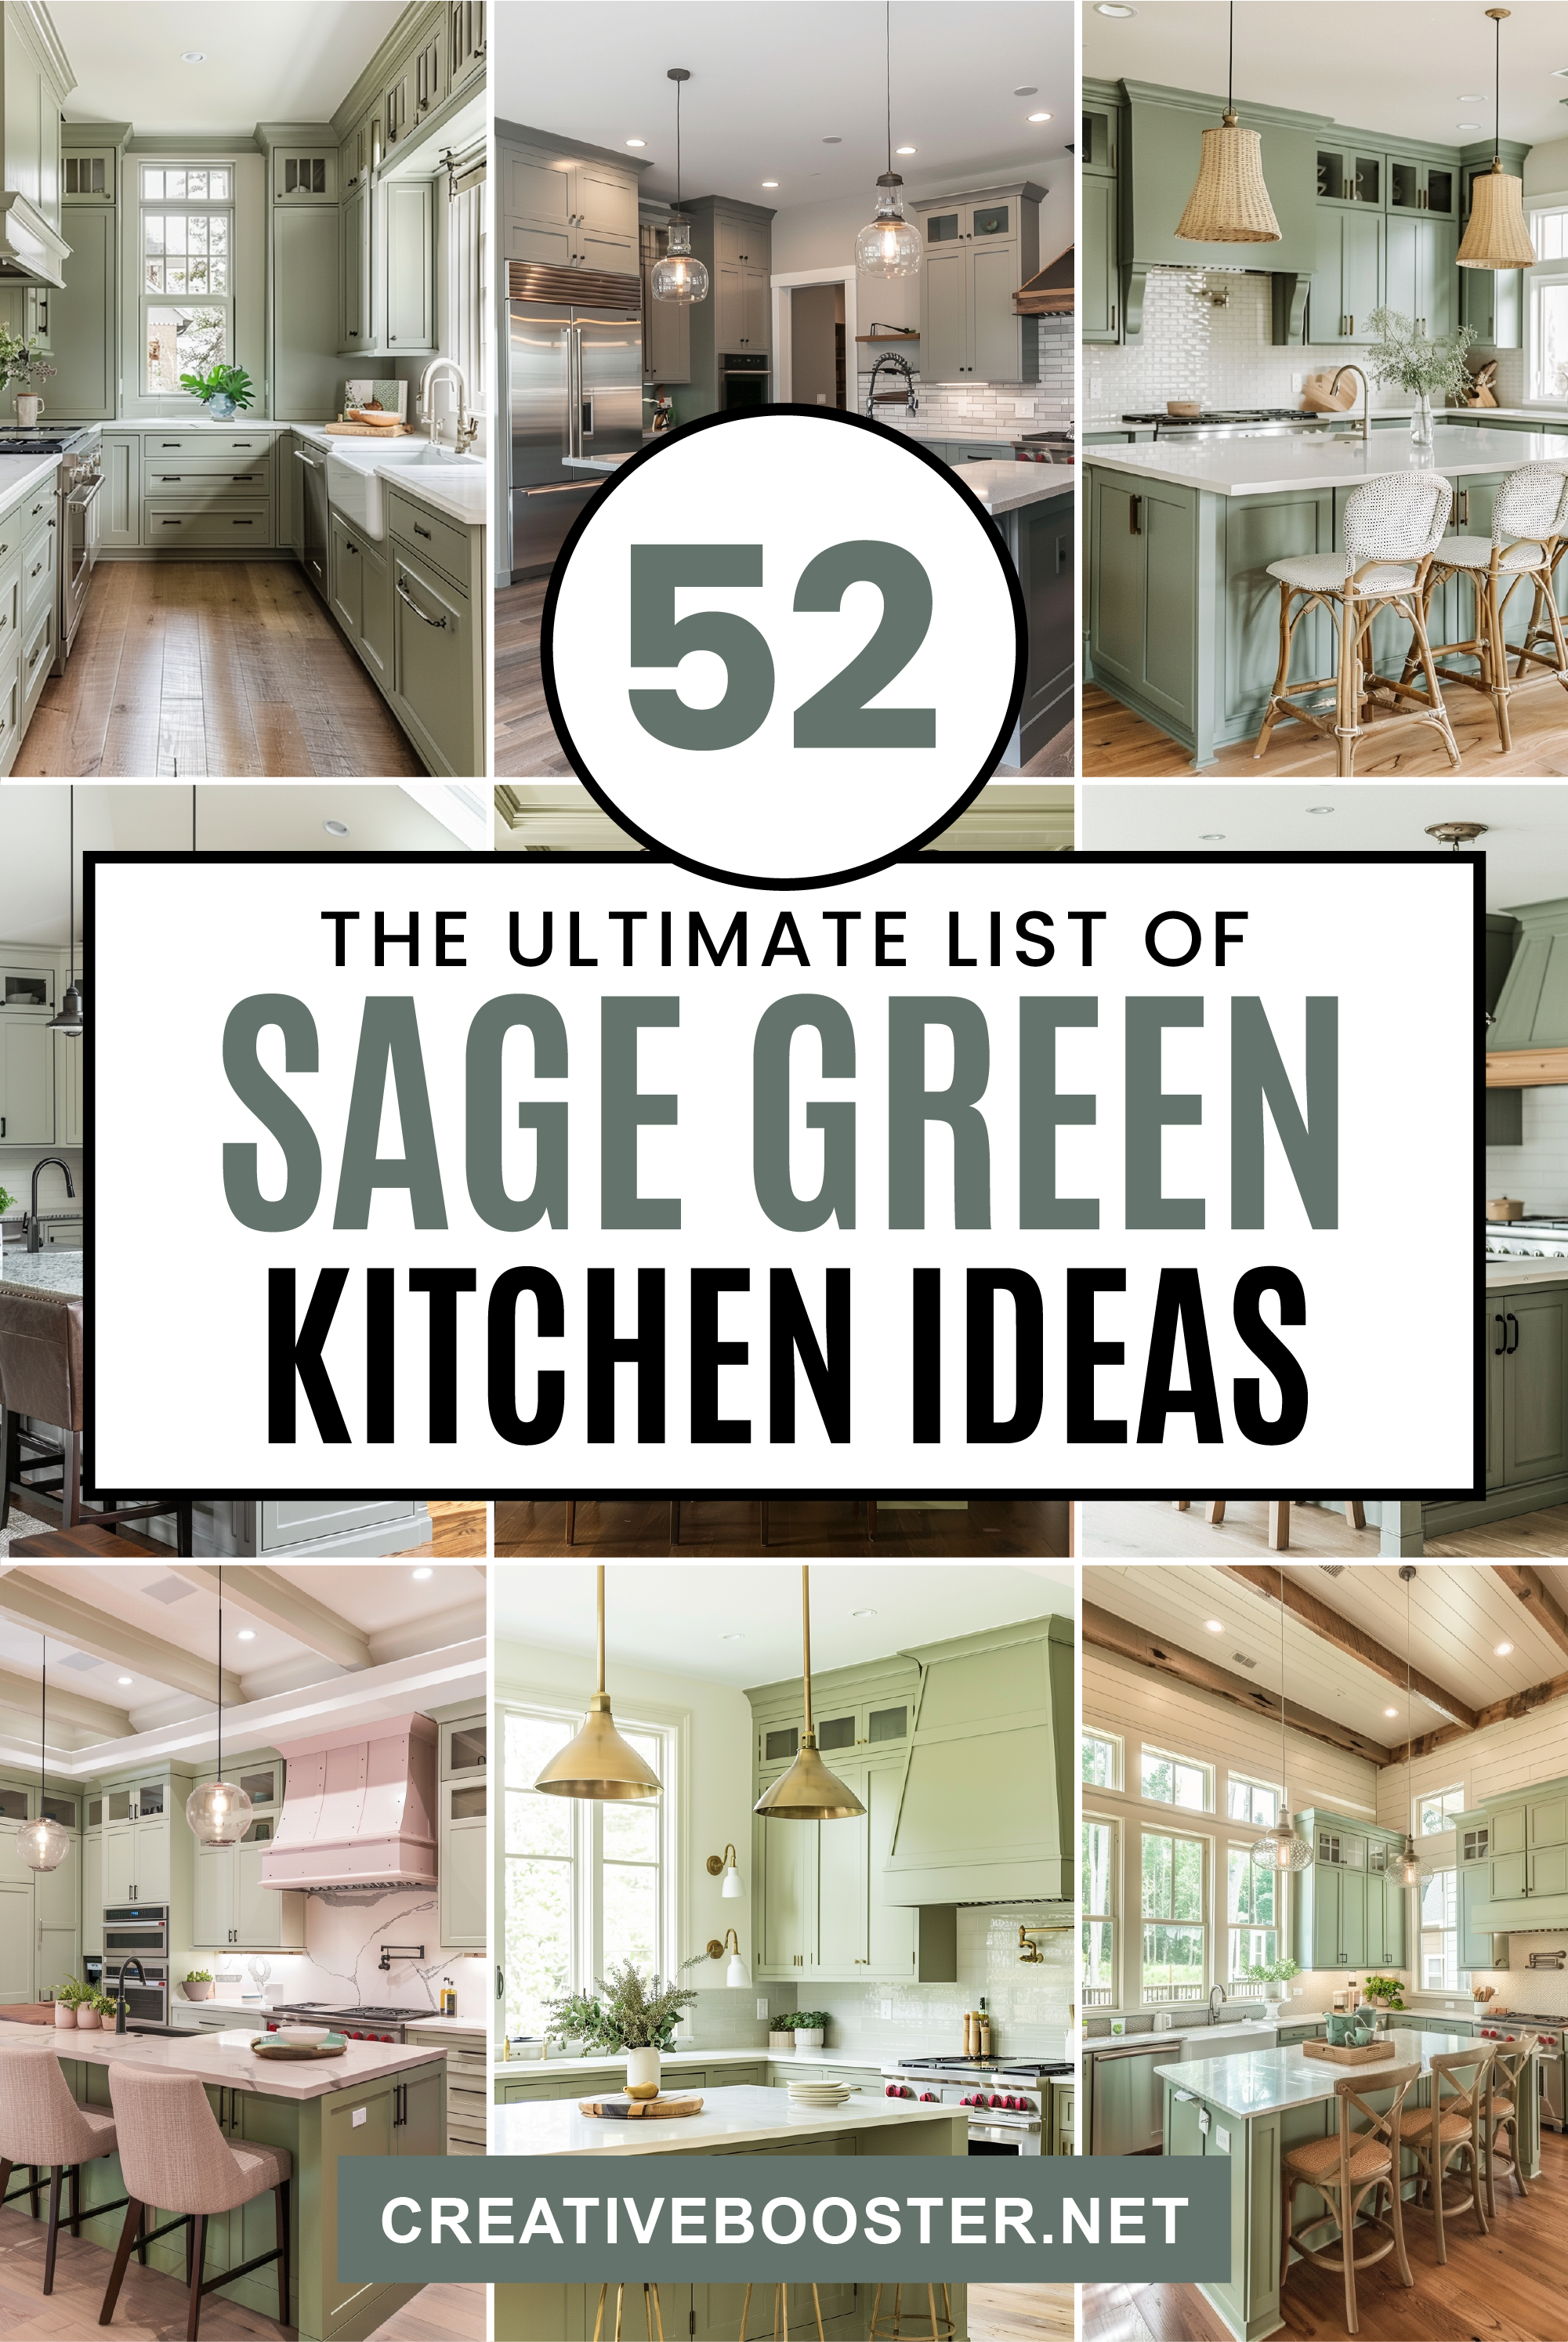 Sage-Green-Kitchen-Ideas-(Home-Decoration-and-Wall-Paint-Design-Inspiration) Tall 3